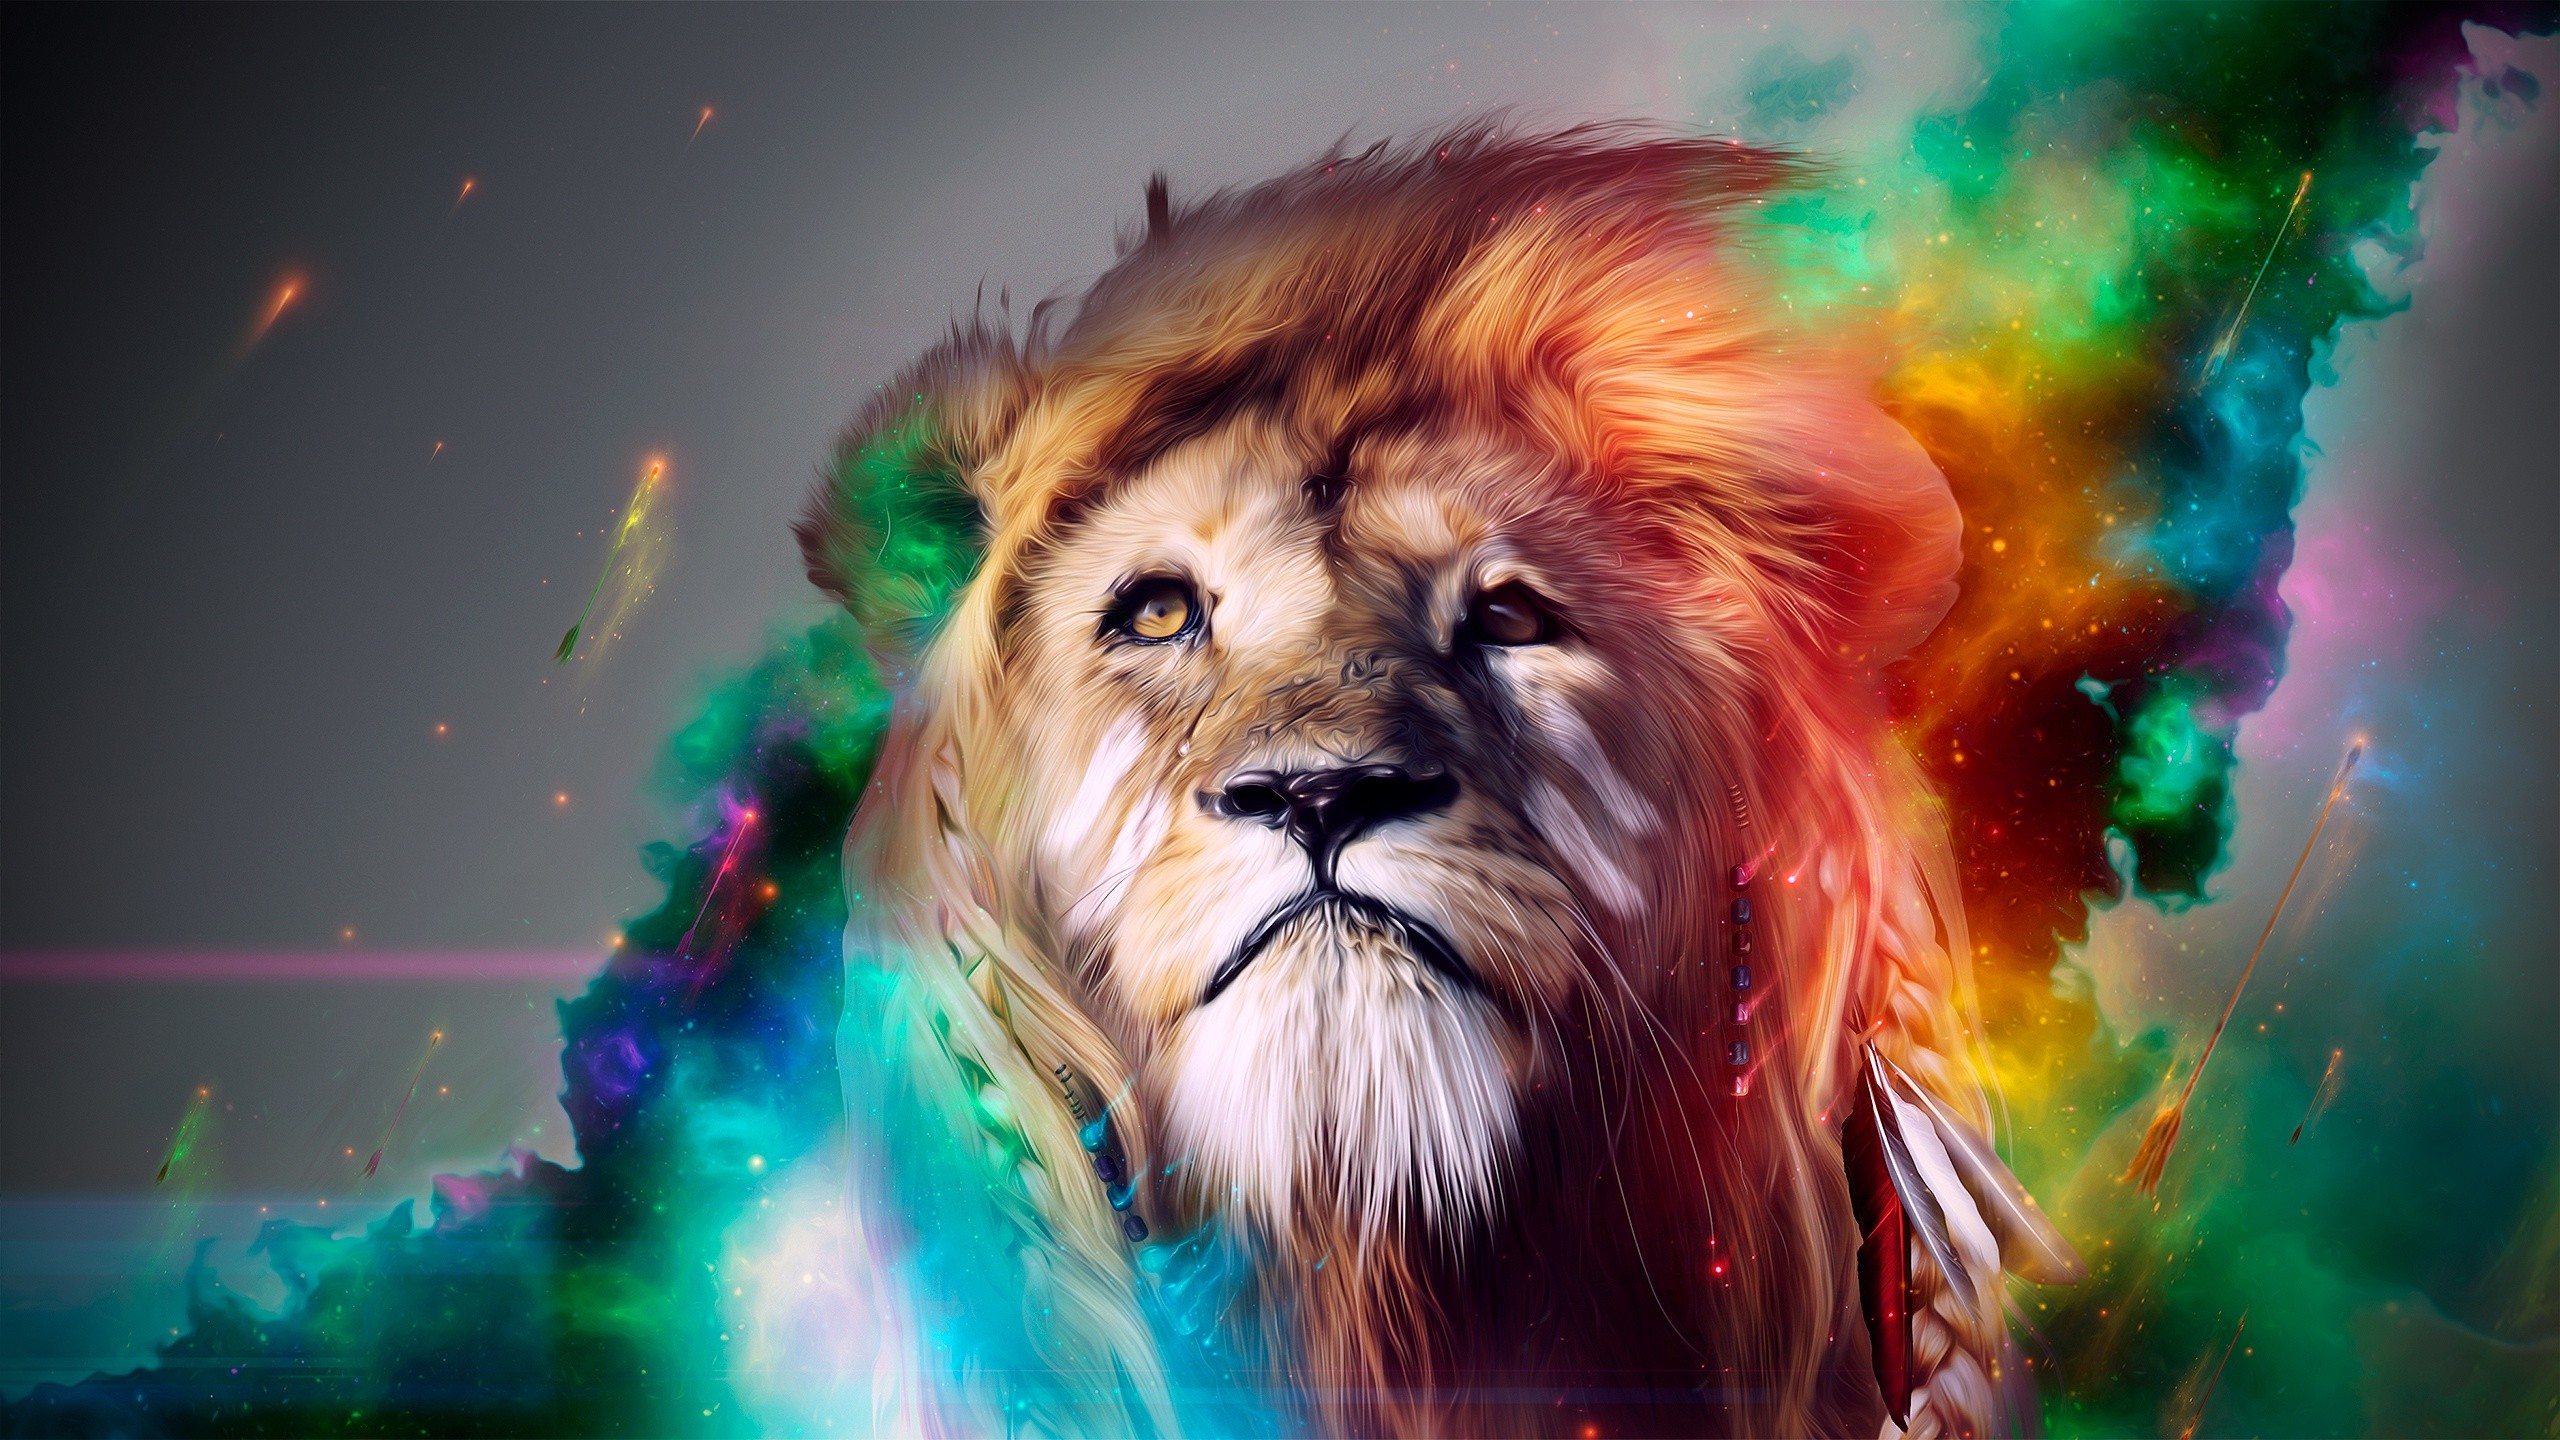 lion, animal, cats, colorful